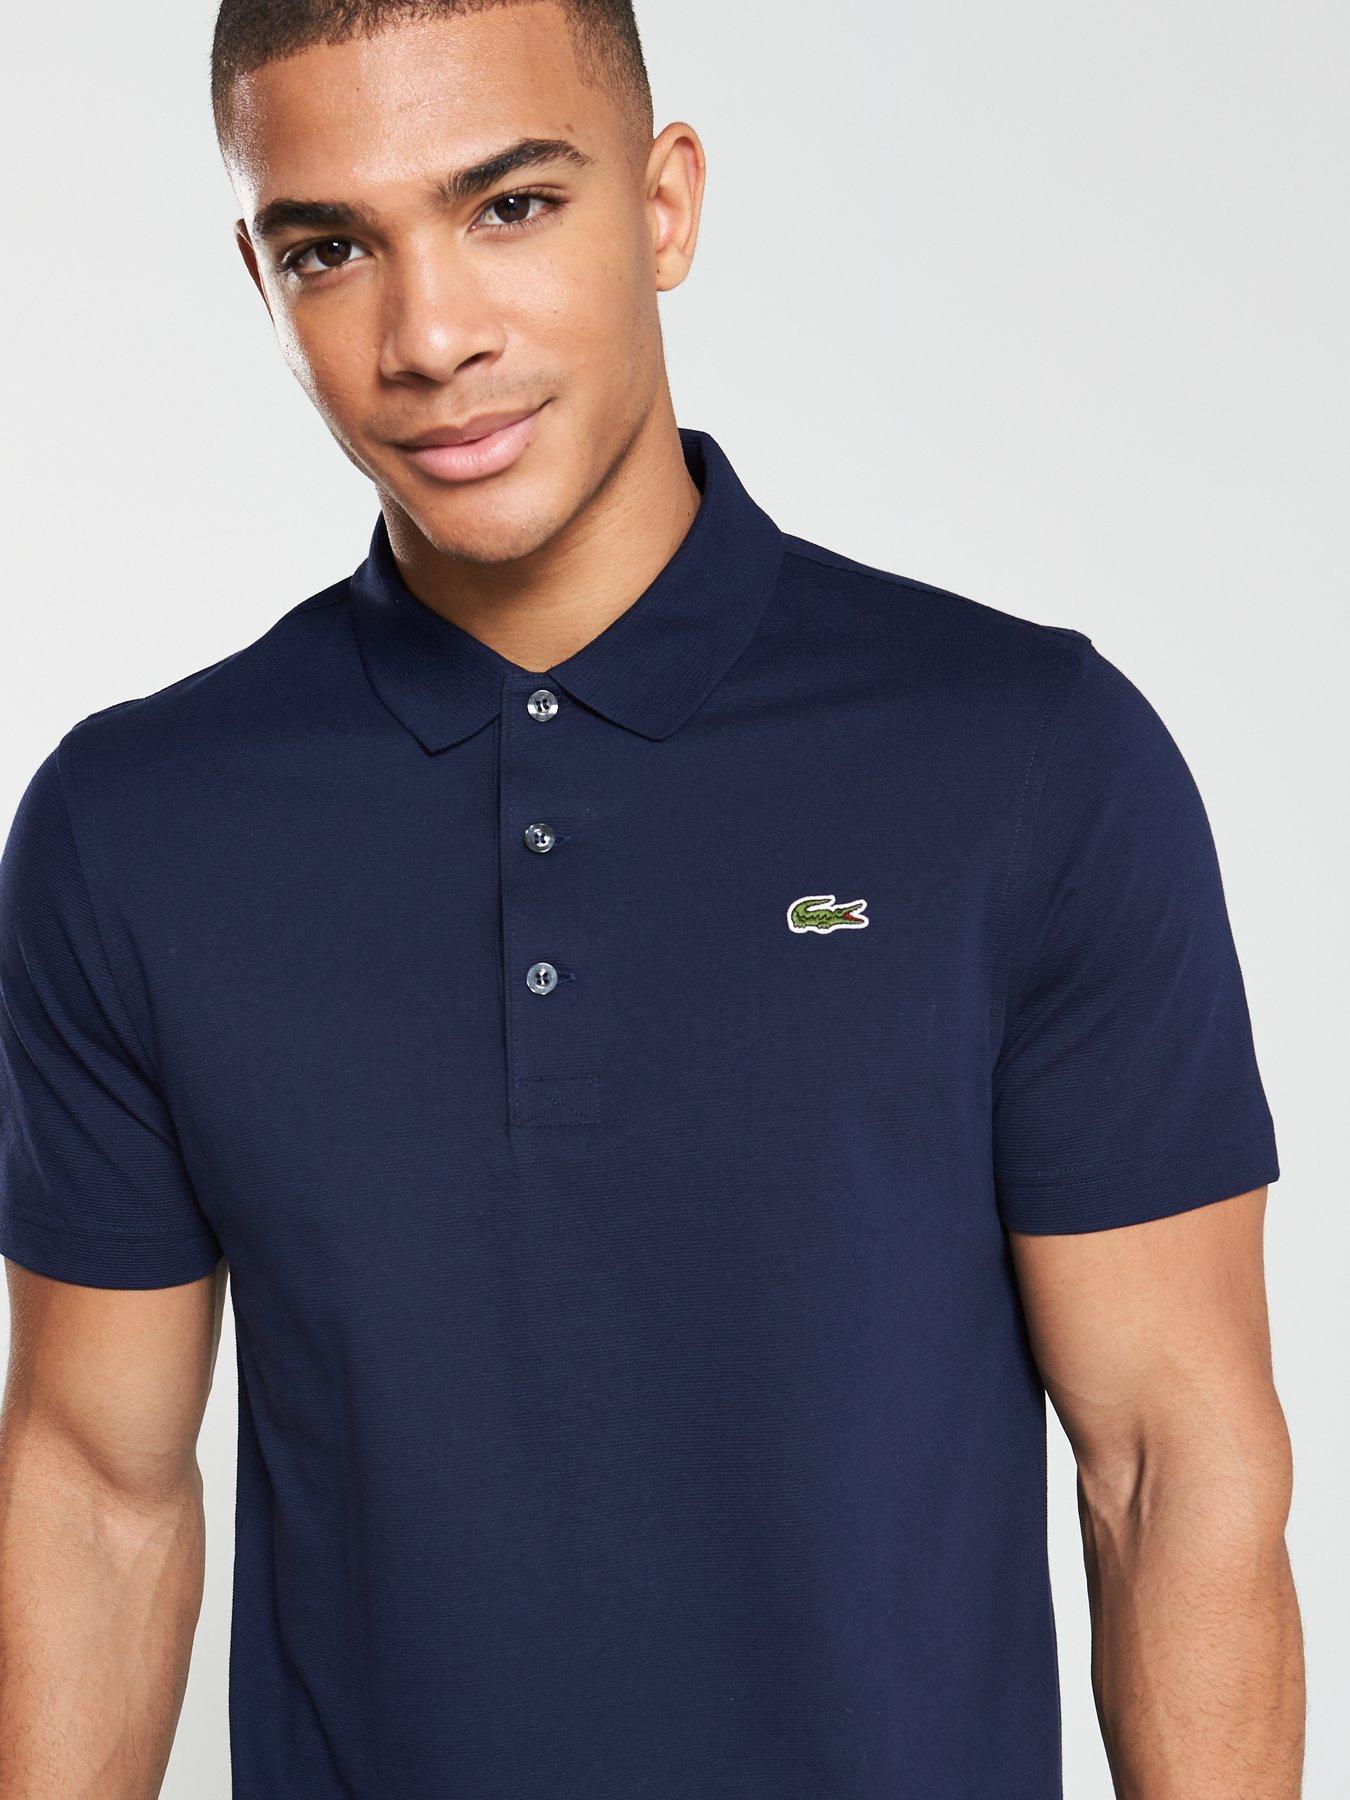 lacoste classic fit size guide